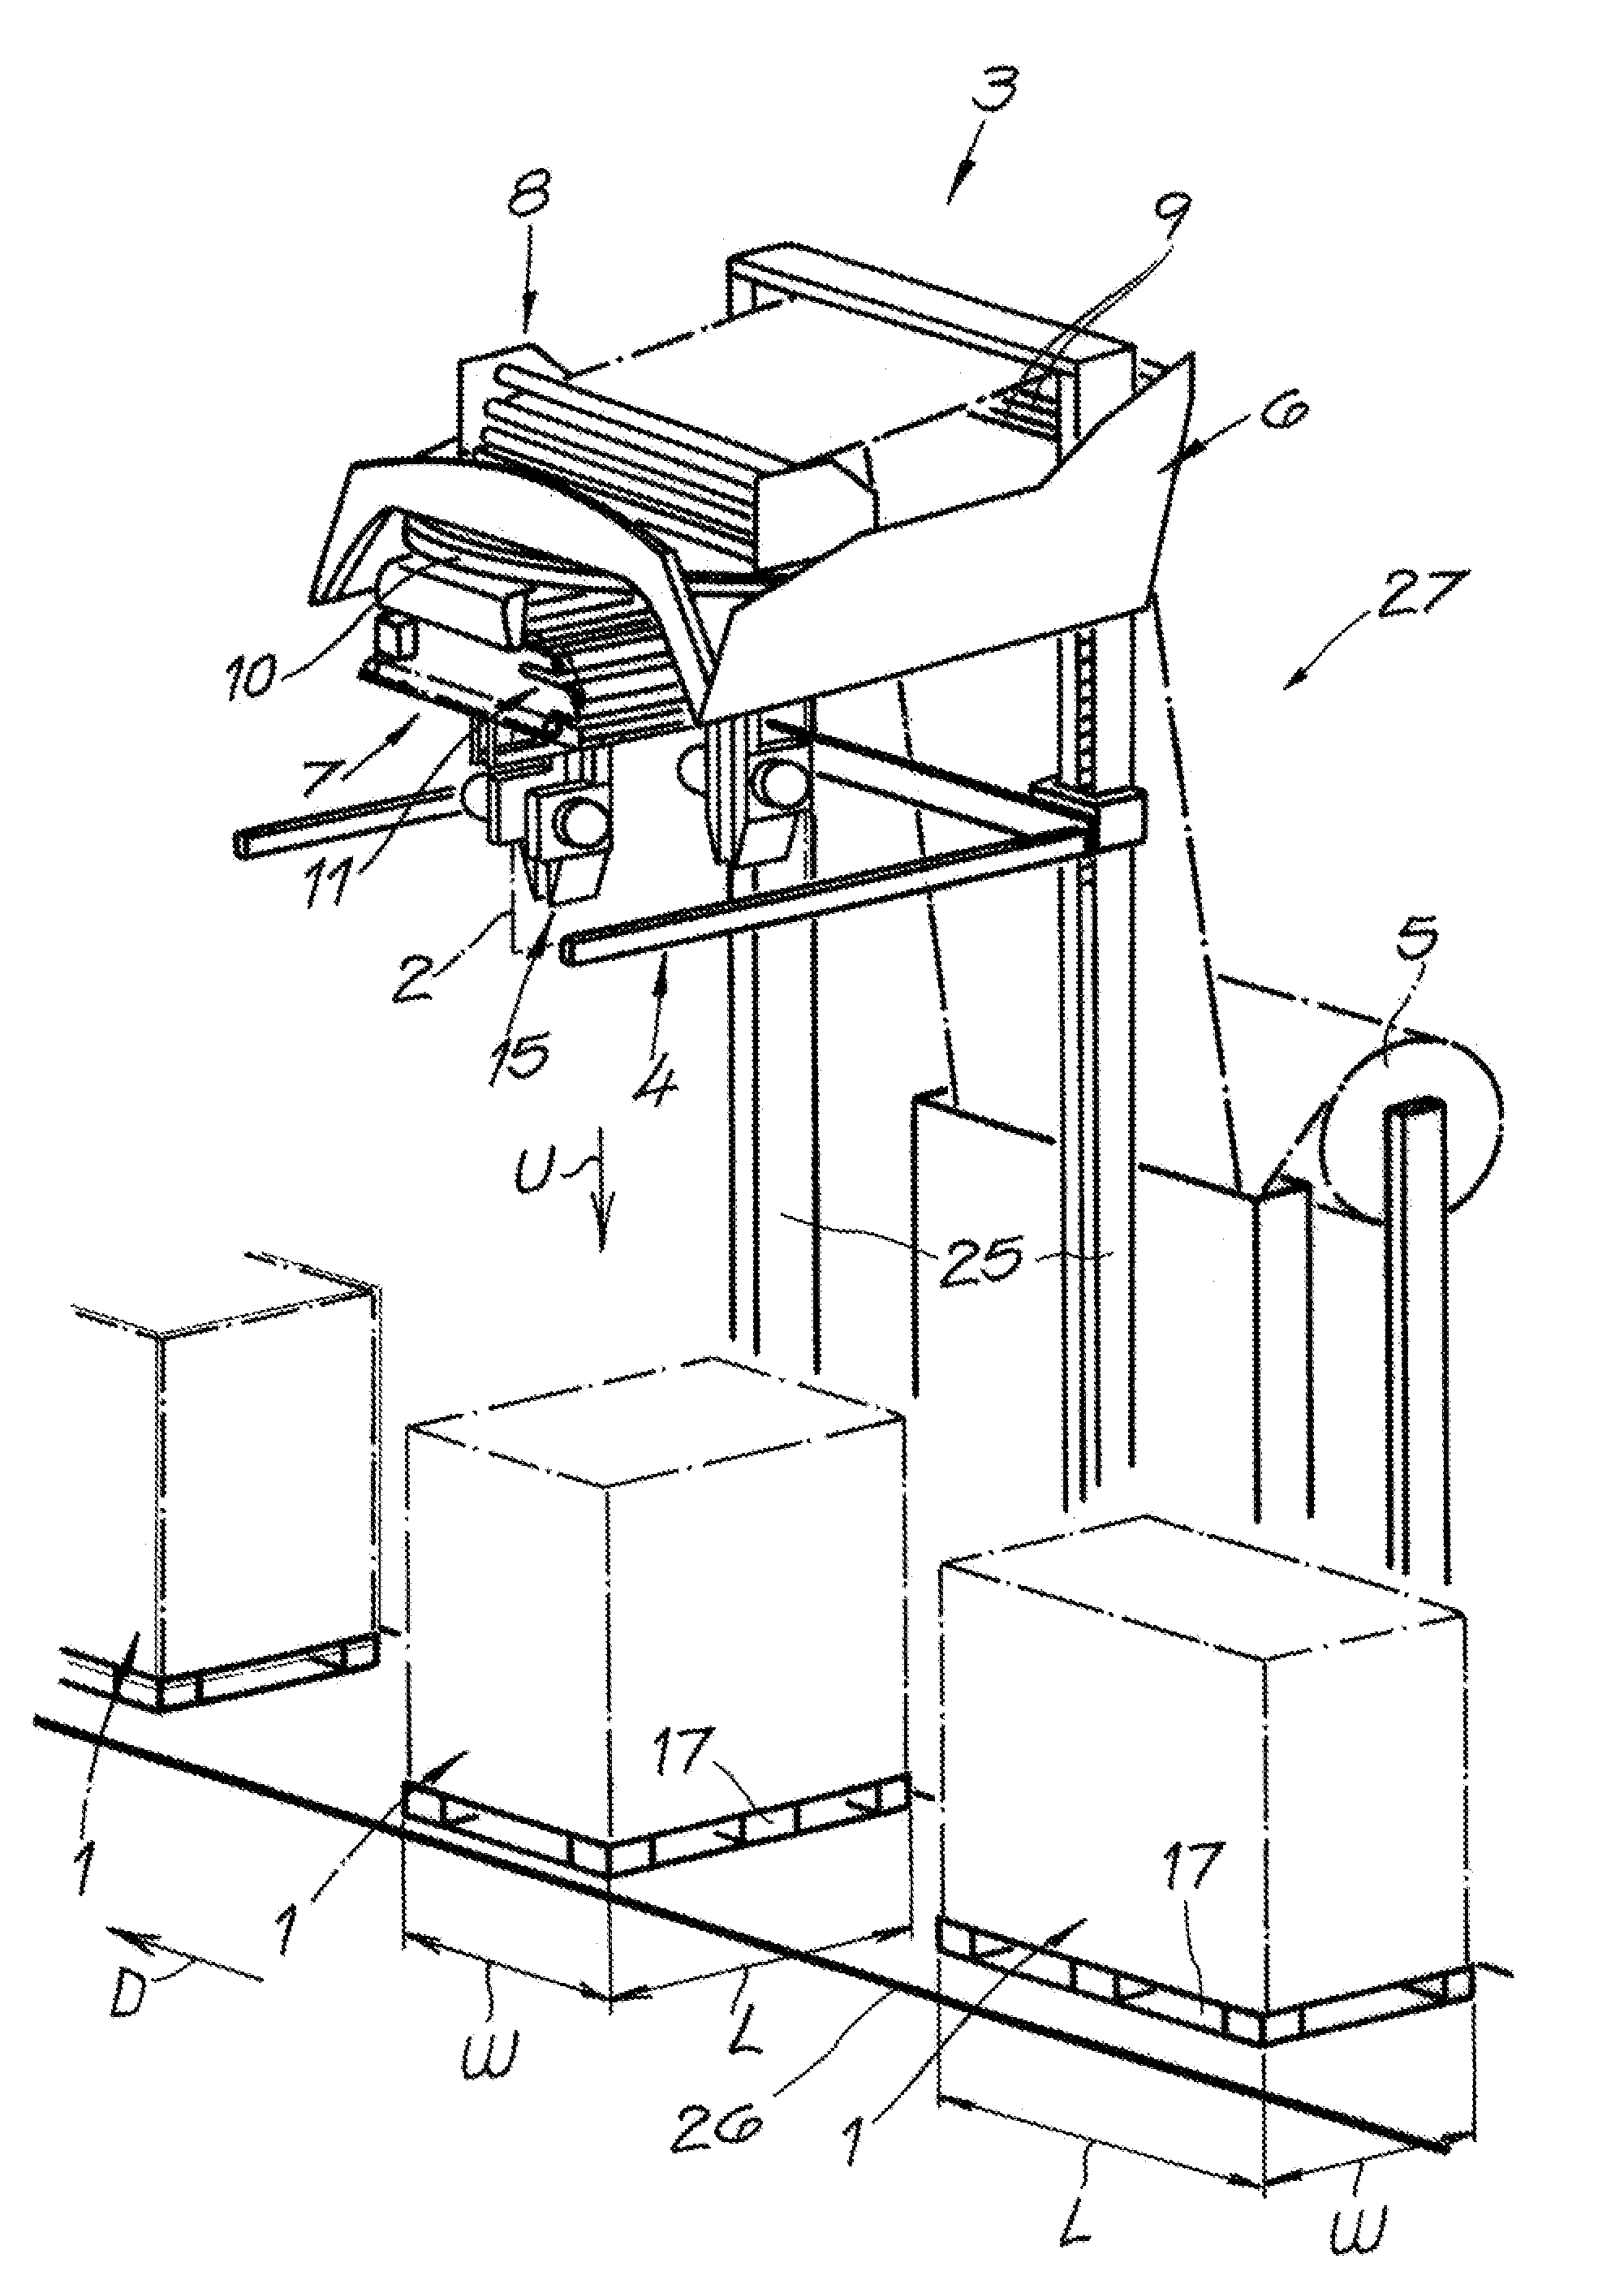 Method and apparatus for wrapping a foil around a stack of objects